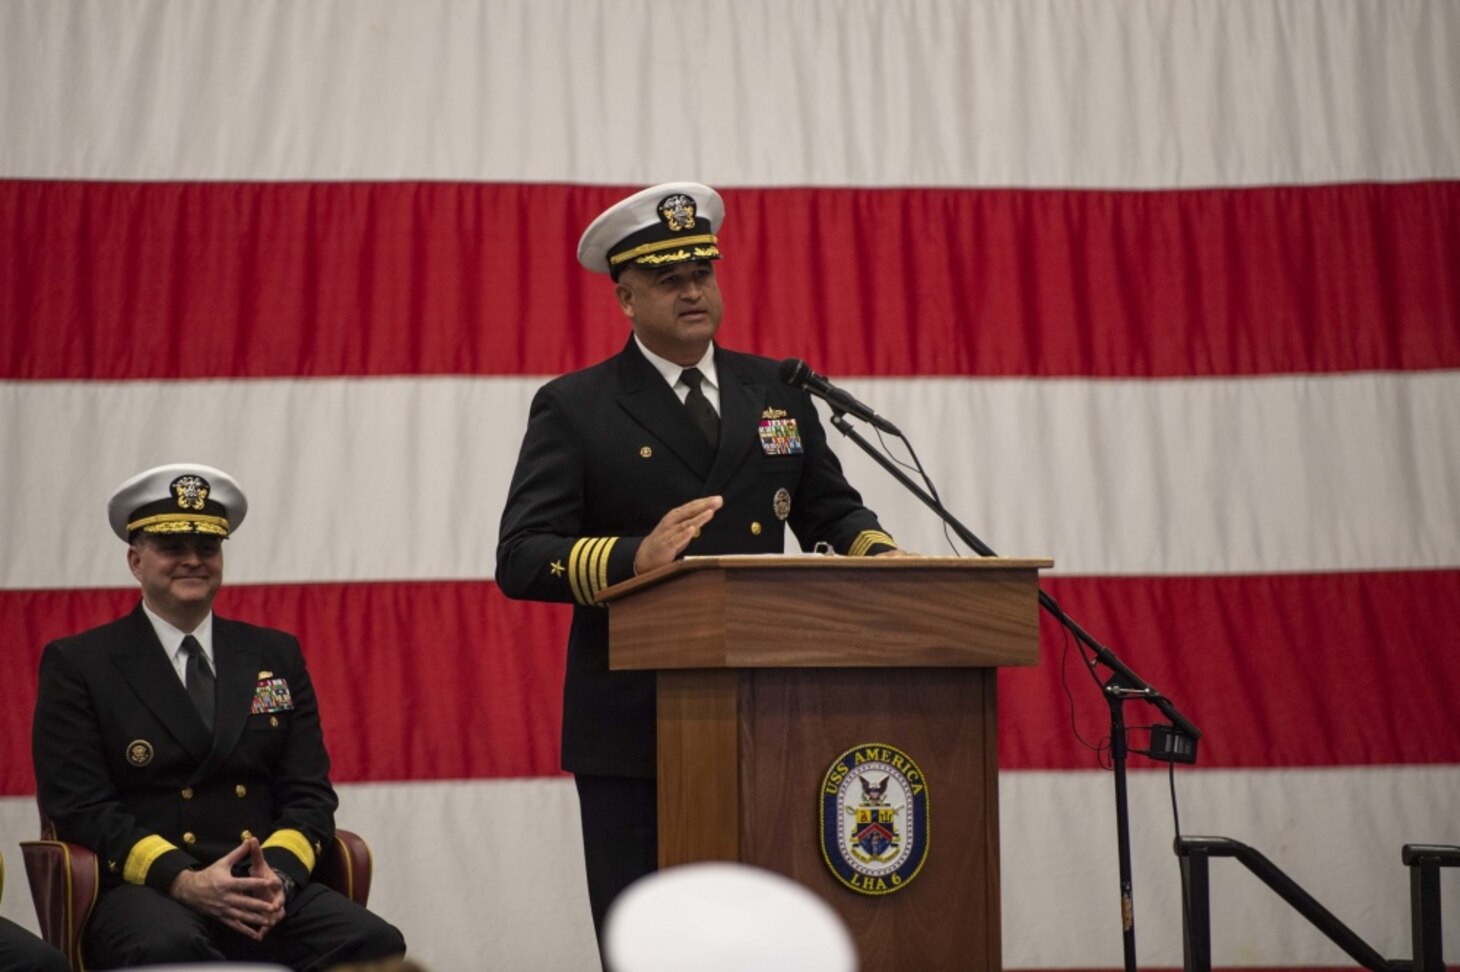 SASEBO, Japan (Dec. 11, 2019) Capt. Richard Lebron, commodore of Amphibious Squadron (PHIBRON) 11, speaks during a change of command ceremony in the hangar bay of amphibious assault ship USS America (LHA 6). Lebron relieved Capt. Jim McGovern as commodore of the only forward-deployed amphibious squadron in the U.S. Navy. America, part of Commander, PHIBRON 11 and Expeditionary Strike Group (ESG) 7, is operating in the Indo-Pacific region to enhance interoperability with partners and serve as a ready-response force for any type of contingency.